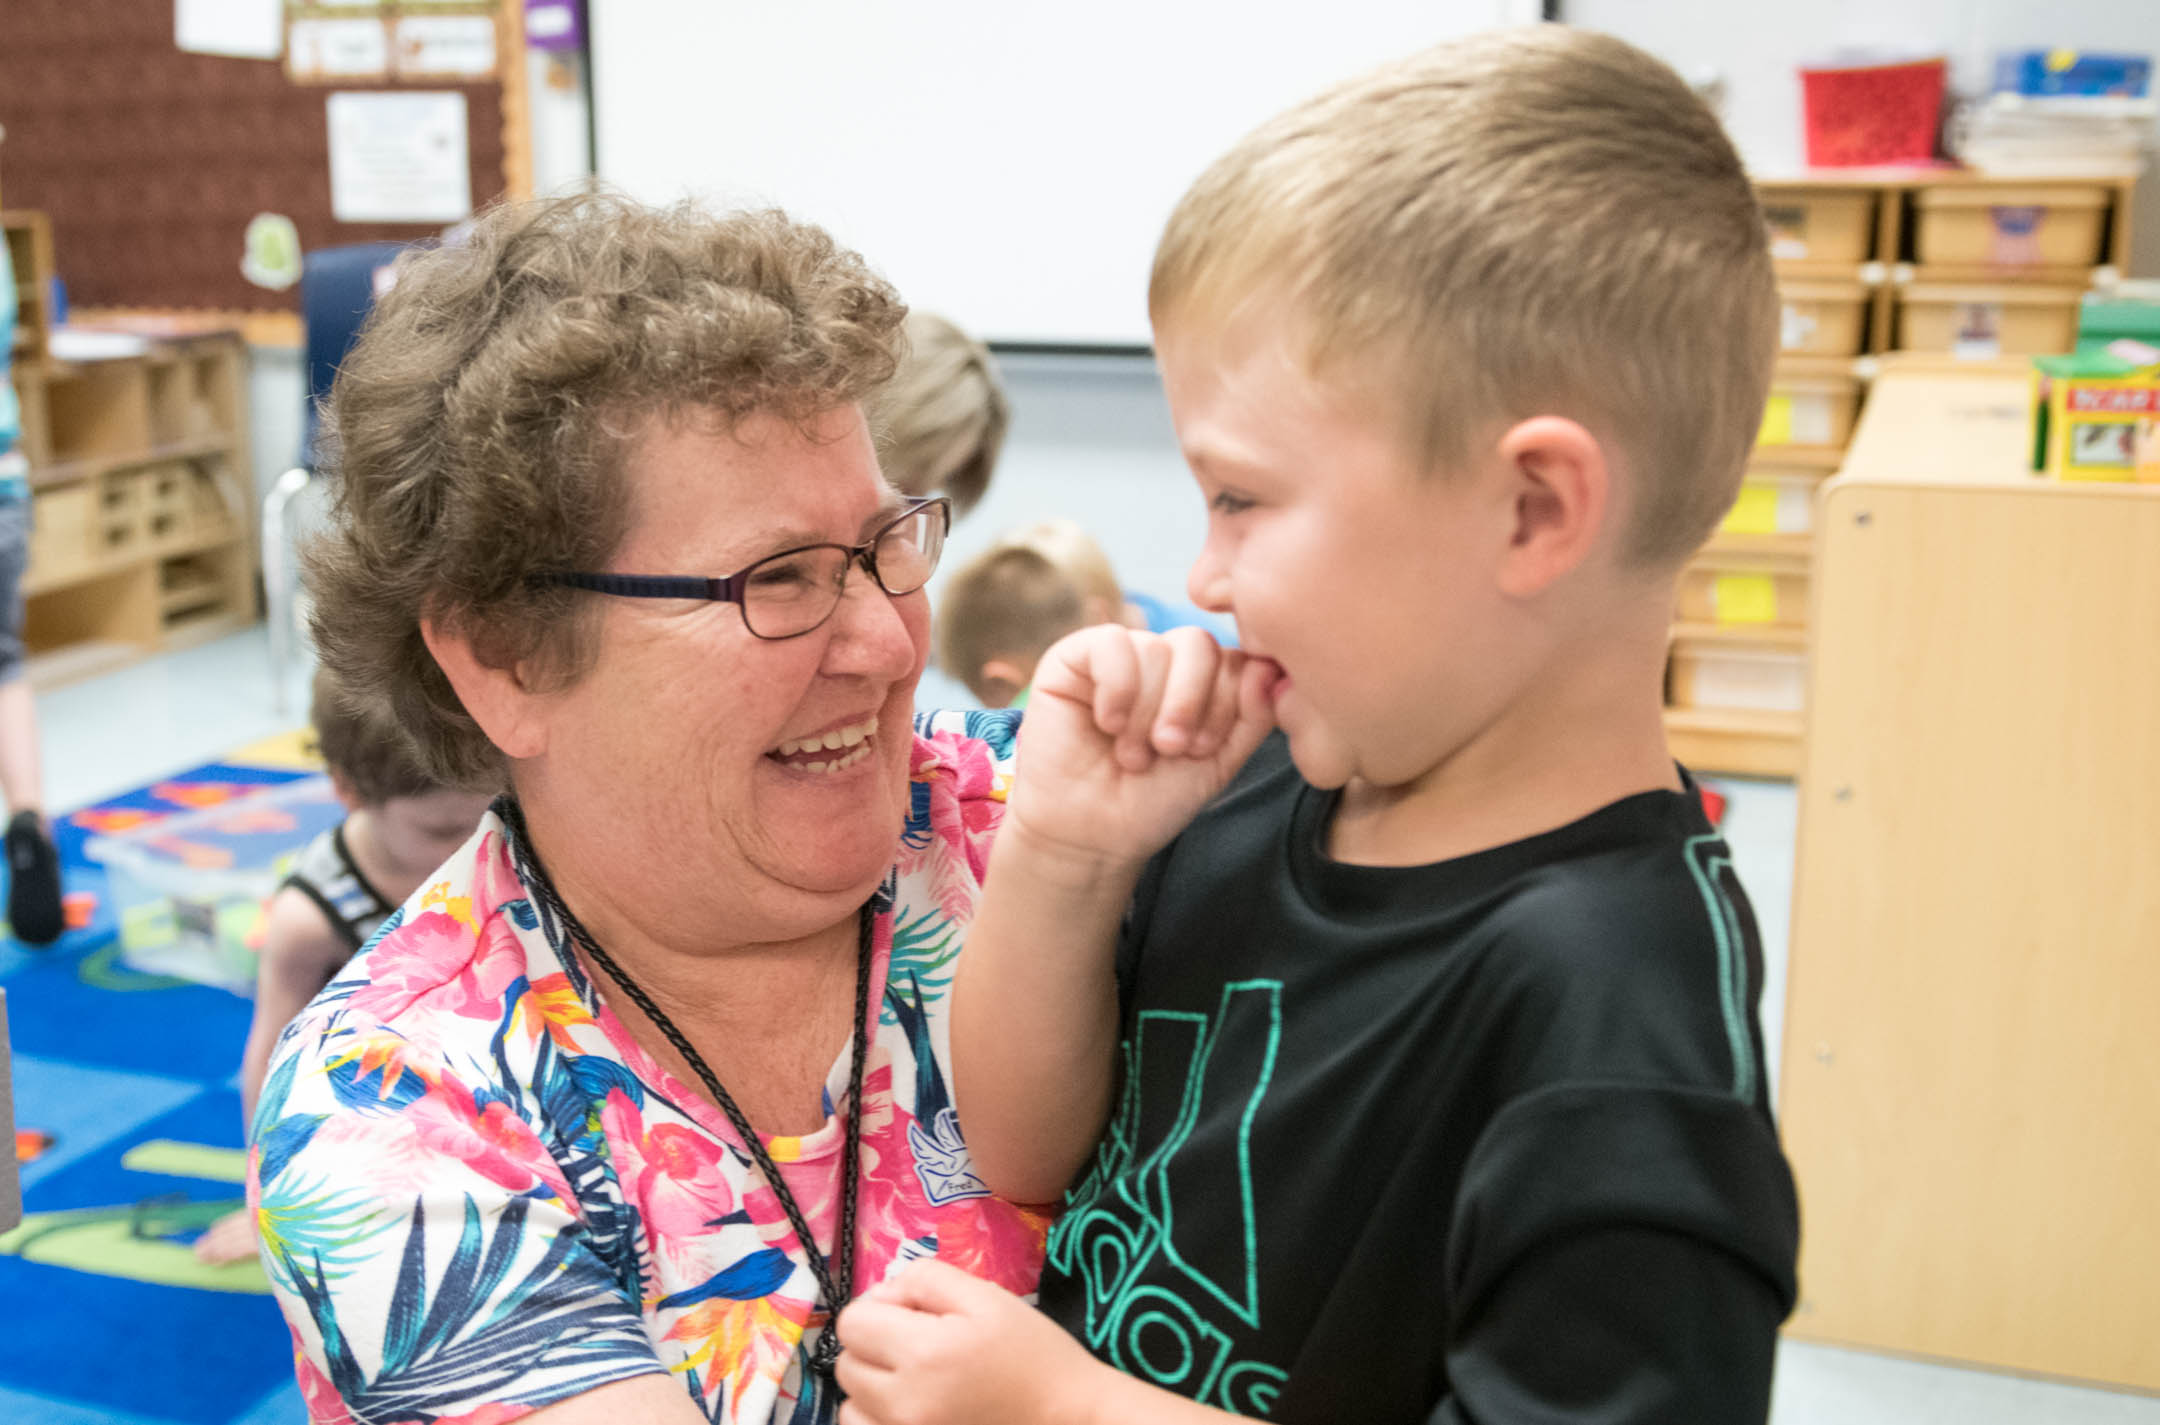 Rita Renfrow, a preschool classroom assistant at North Butler Elementary (Butler County), hugs Aiden Justis during class. Renfrow, who began working at the school as a volunteer, received the 2018 Fred Award from the Kentucky Association of School Administrators. Photo by Bobby Ellis, Aug. 27, 2018